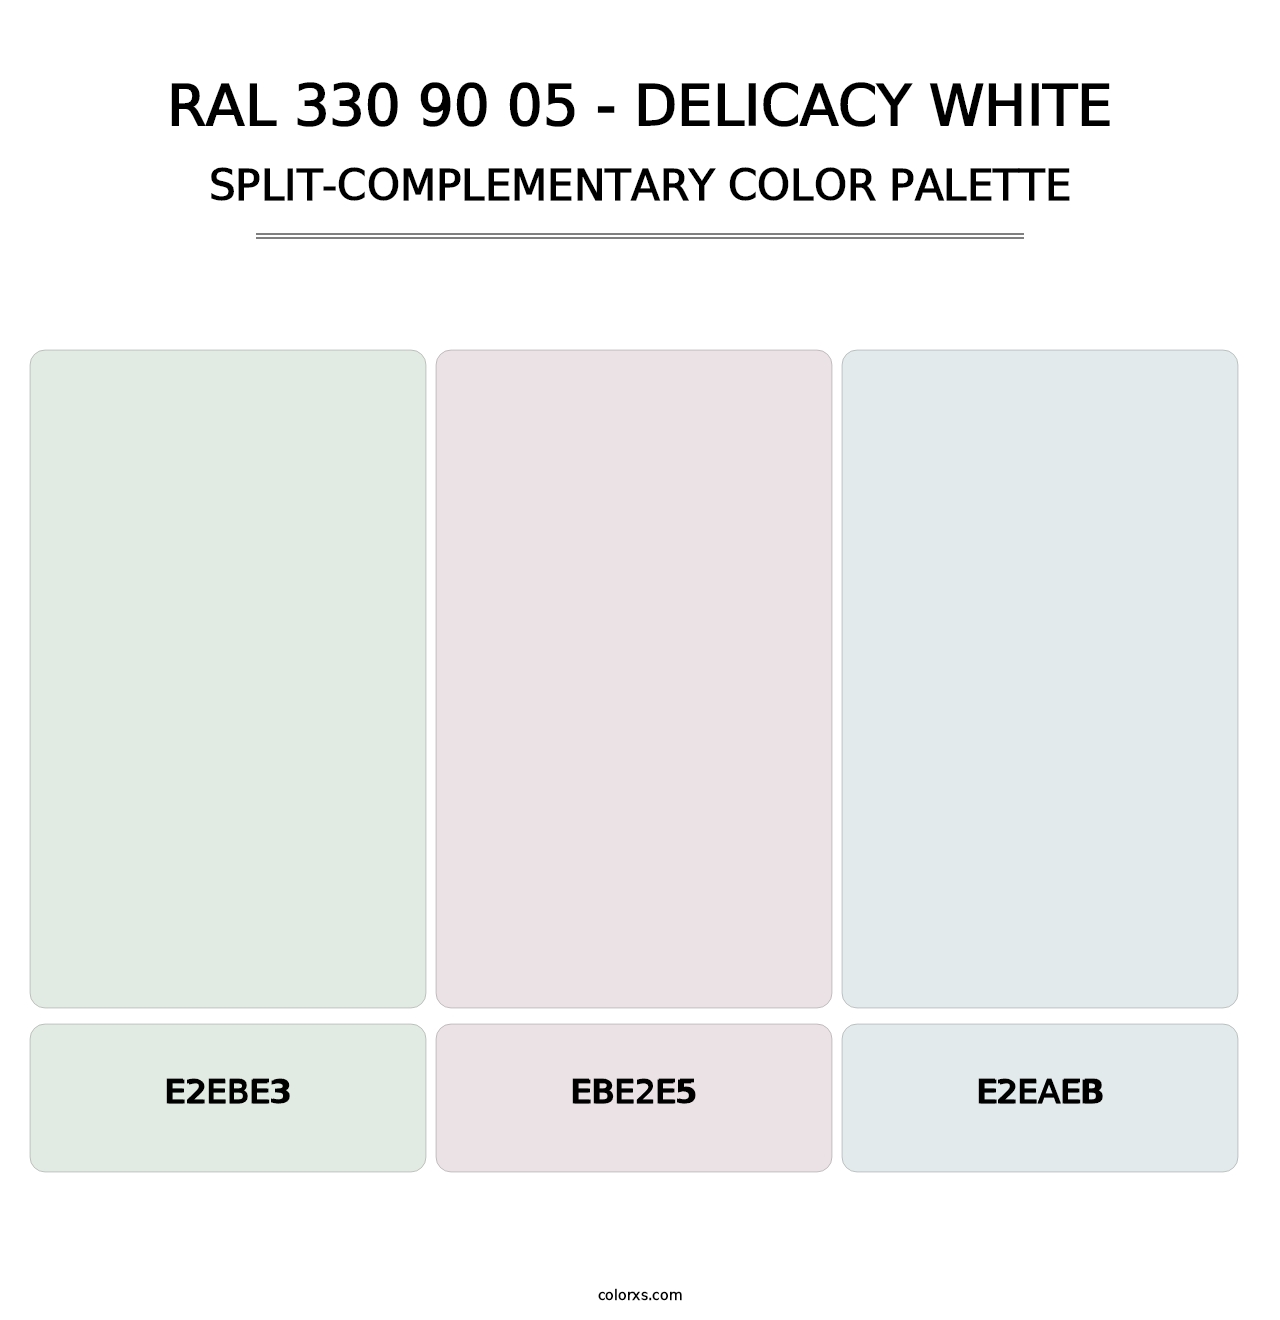 RAL 330 90 05 - Delicacy White - Split-Complementary Color Palette